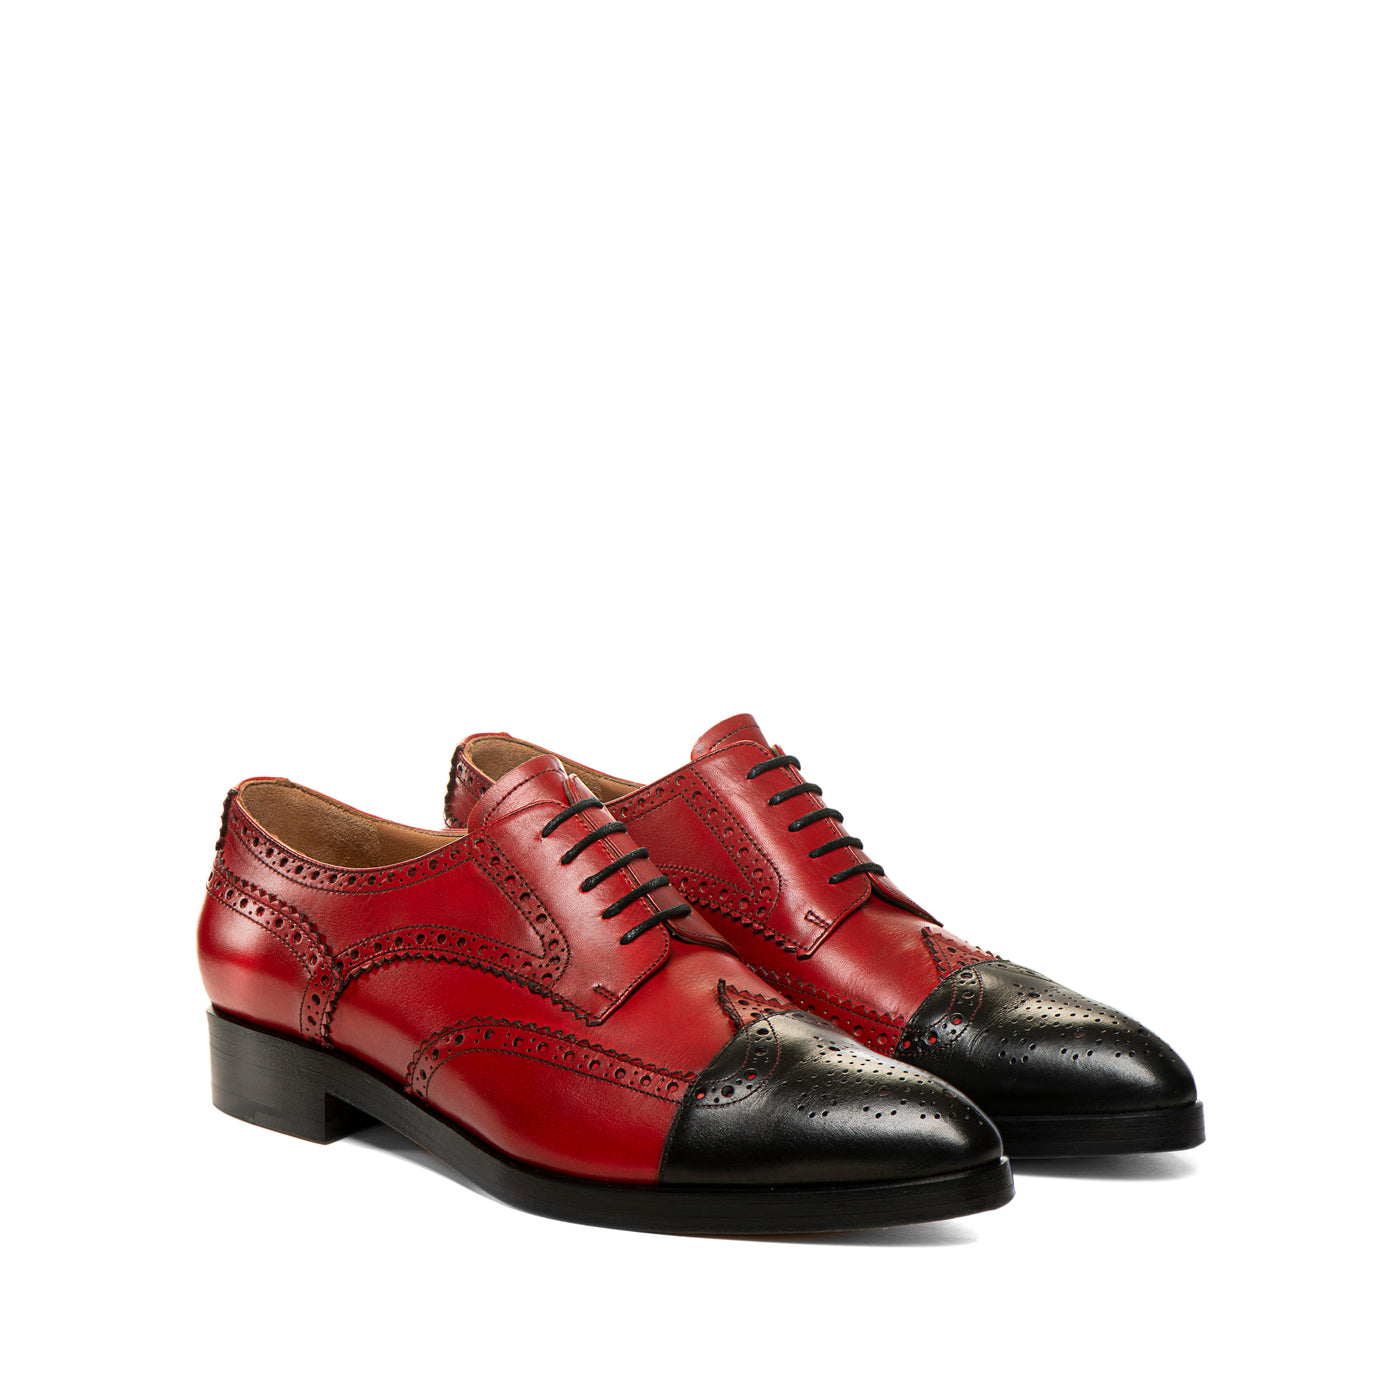 Shop The Latest Collection Of Fratelli Rossetti Woman Arrow Leather Lace-Up 67164 In Lebanon